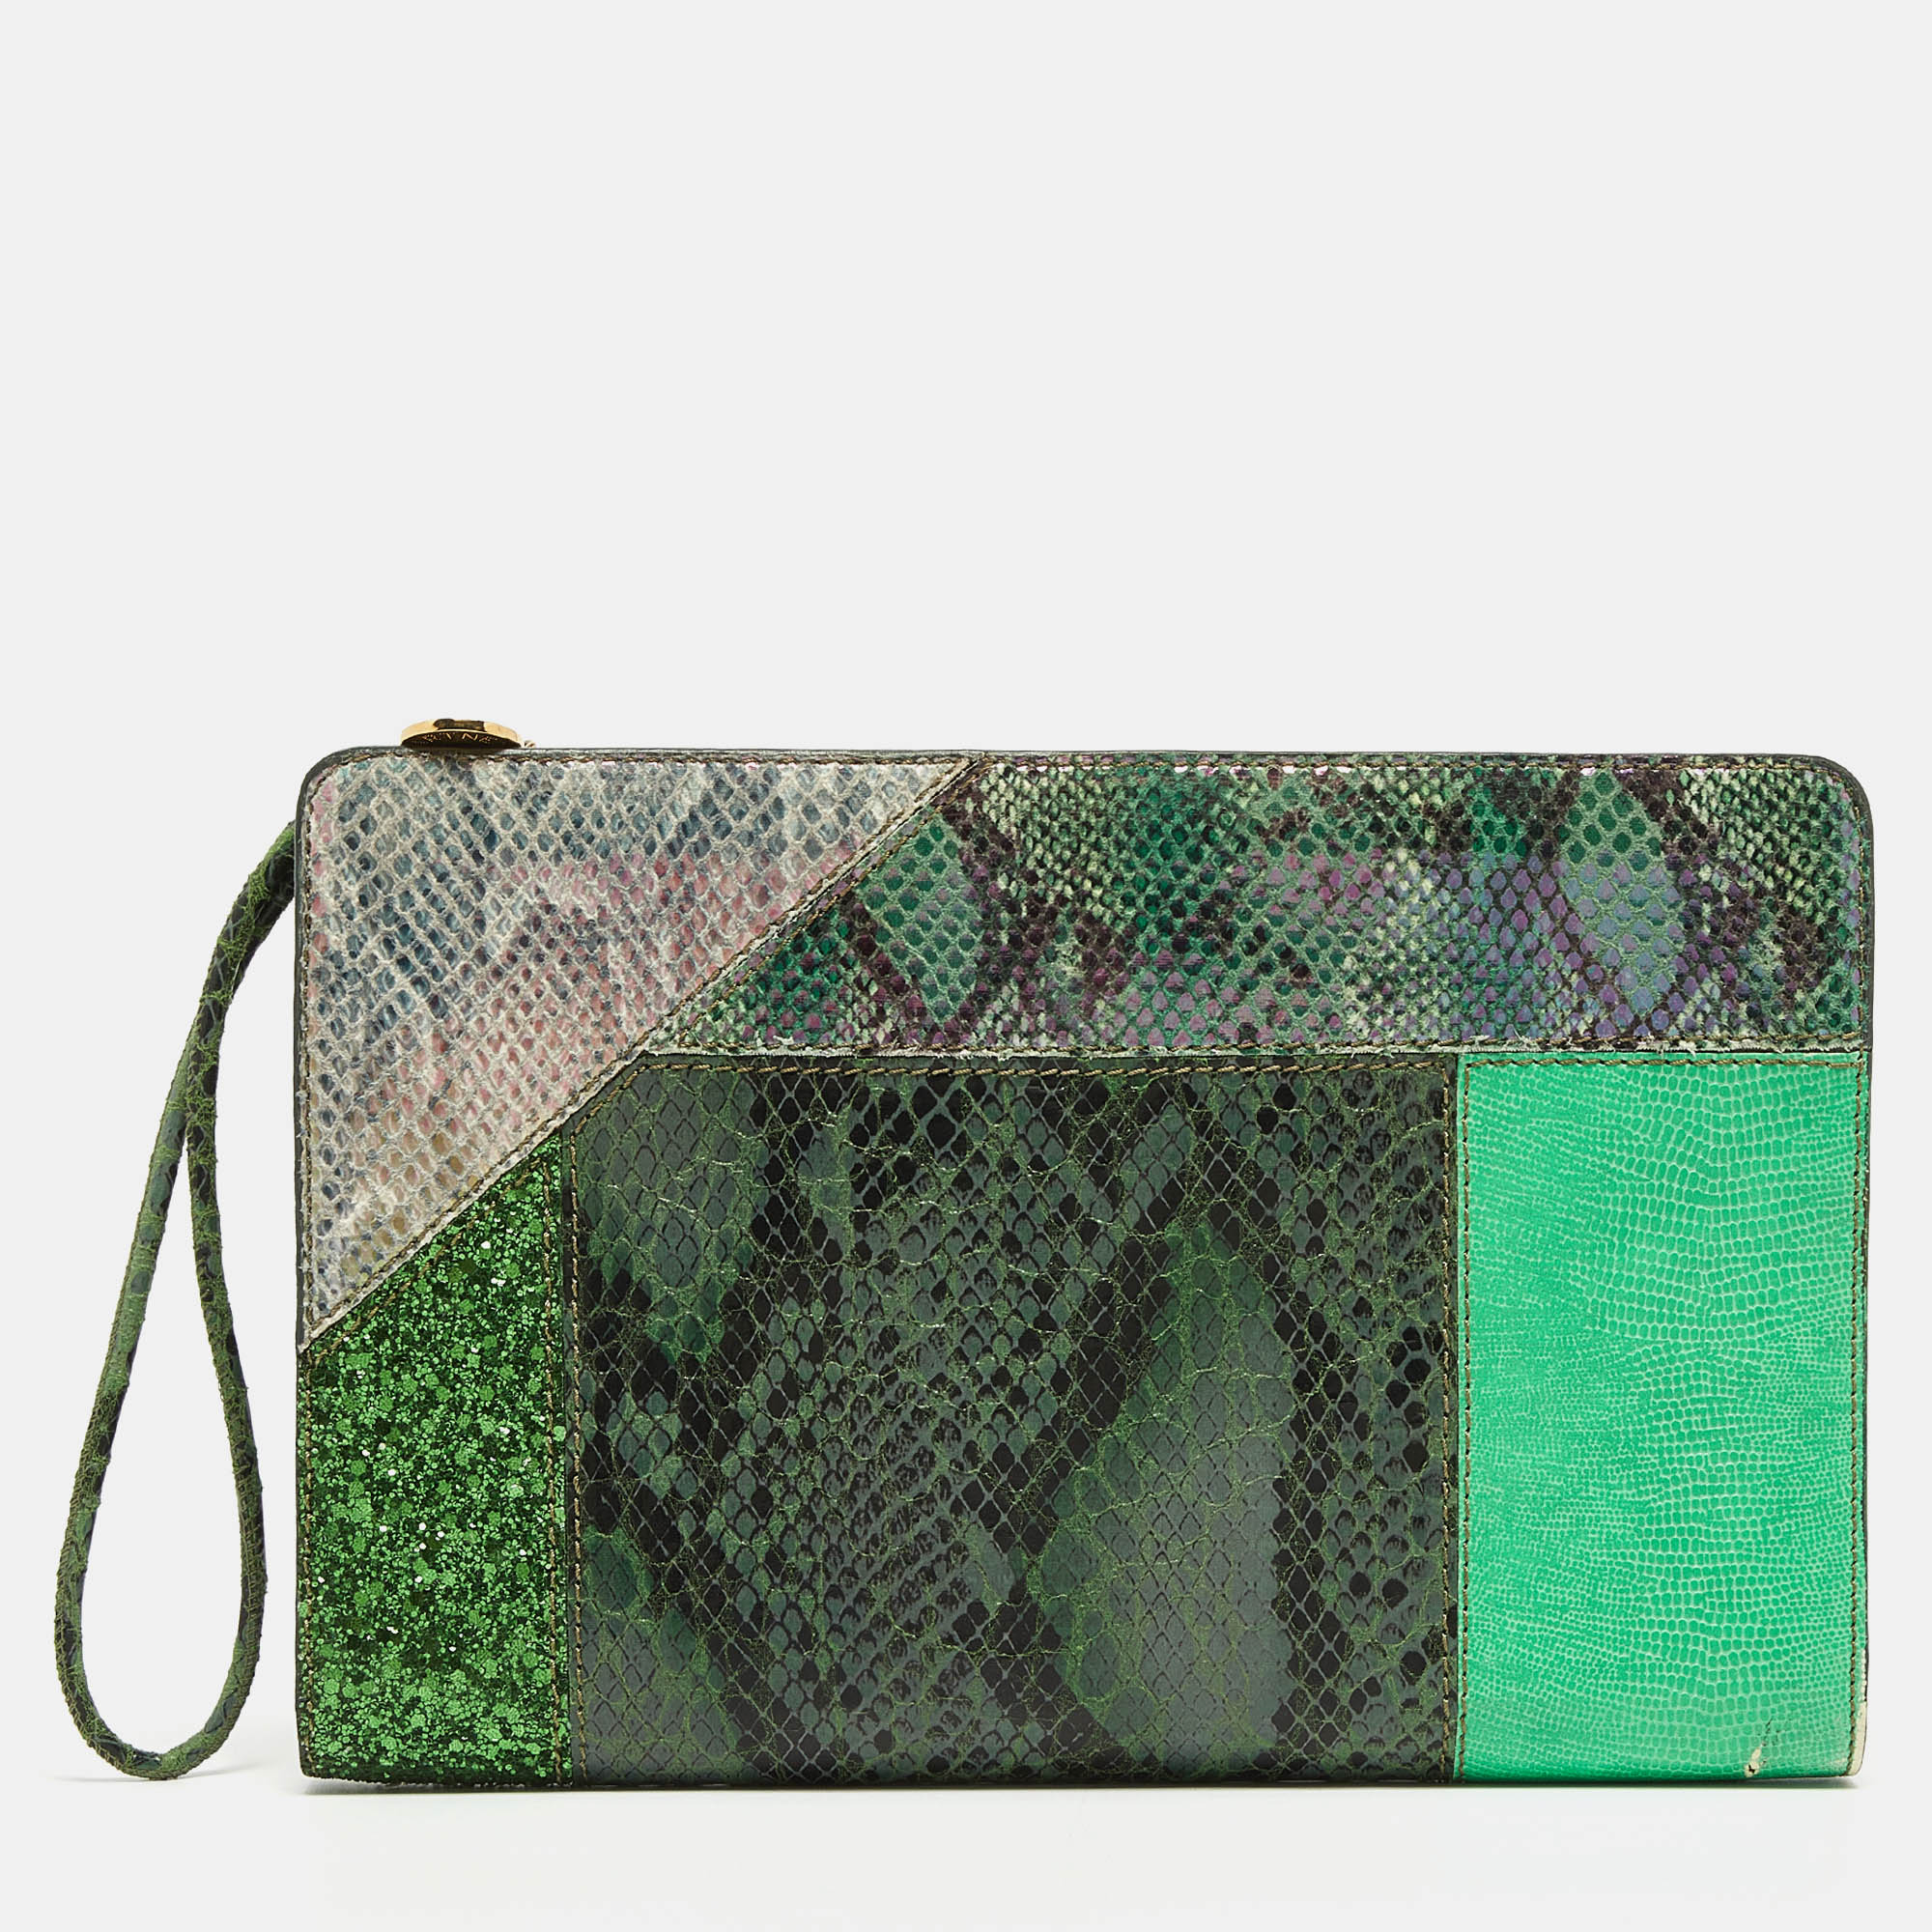 Stella mccartney green faux python embossed and glitter waverly patchwork clutch